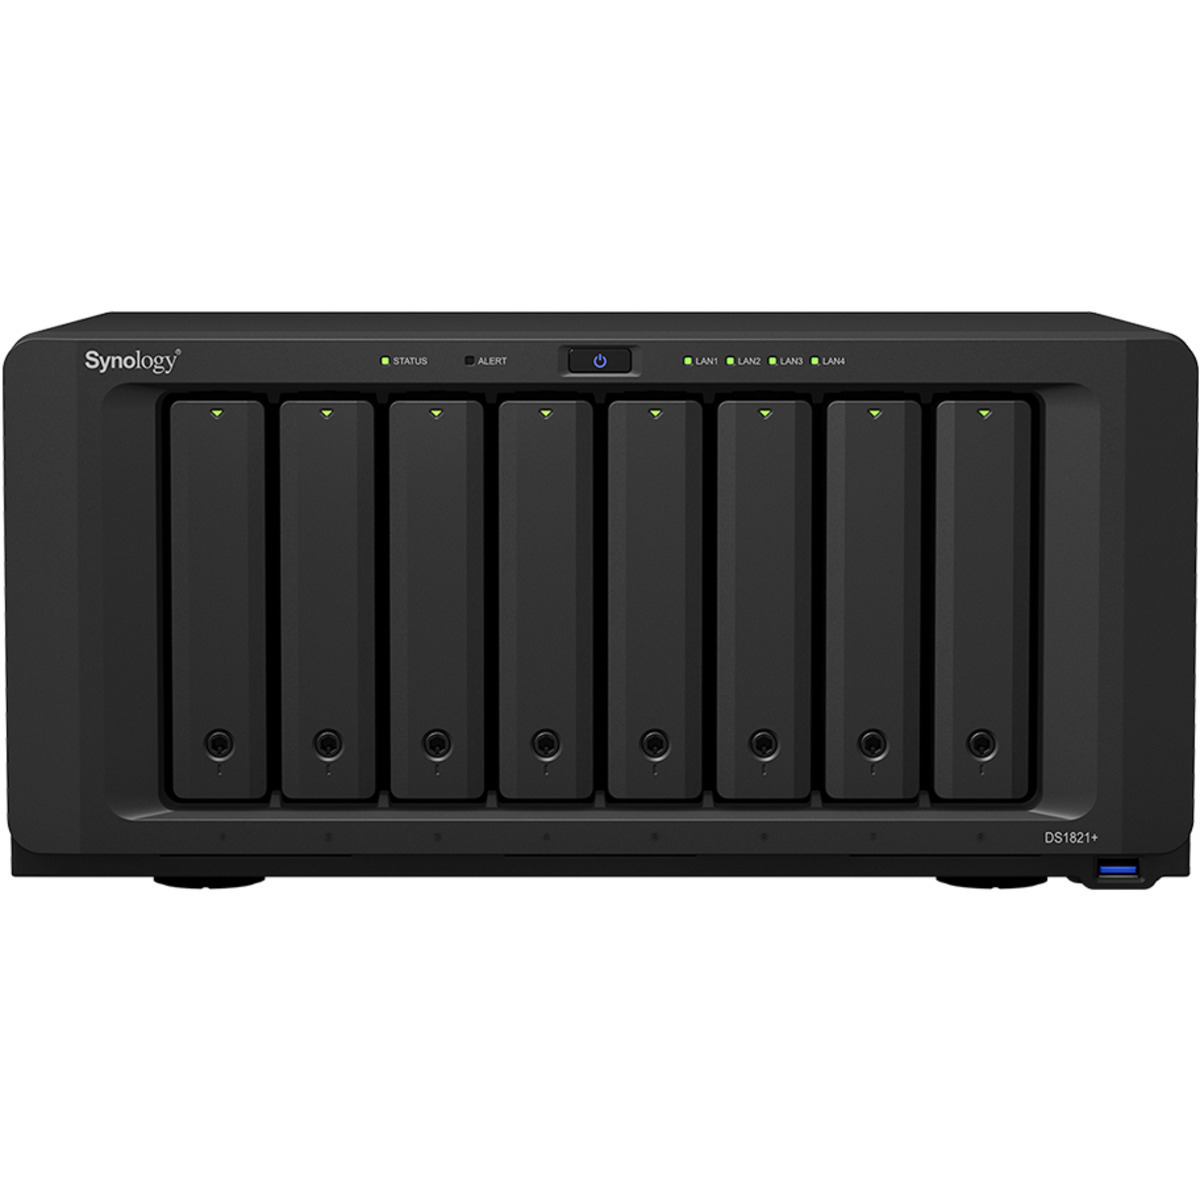 buy Synology DiskStation DS1821+ 96tb Desktop NAS - Network Attached Storage Device 8x12000gb Seagate IronWolf Pro ST12000NT001 3.5 7200rpm SATA 6Gb/s HDD NAS Class Drives Installed - Burn-In Tested - ON SALE - FREE RAM UPGRADE - nas headquarters buy network attached storage server device das new raid-5 free shipping simply usa DiskStation DS1821+